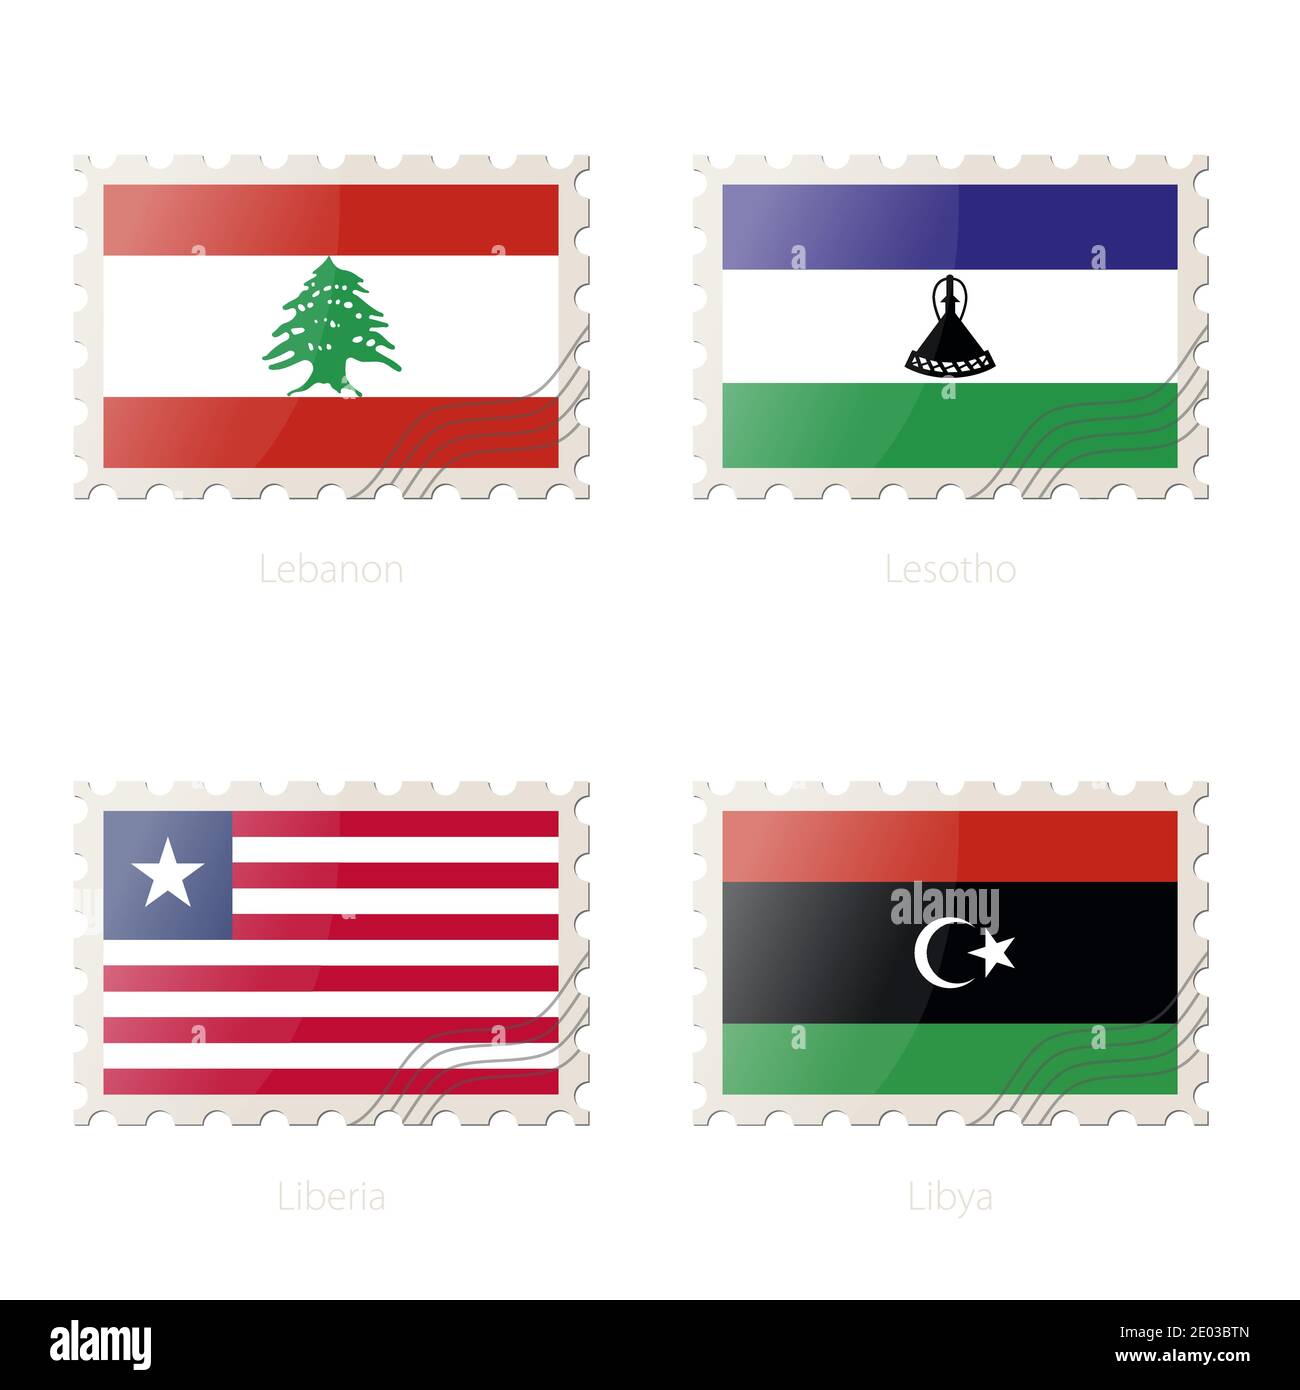 Postage stamp with the image of Lebanon, Lesotho, Liberia, Libya flag. Vector Illustration. Stock Vector